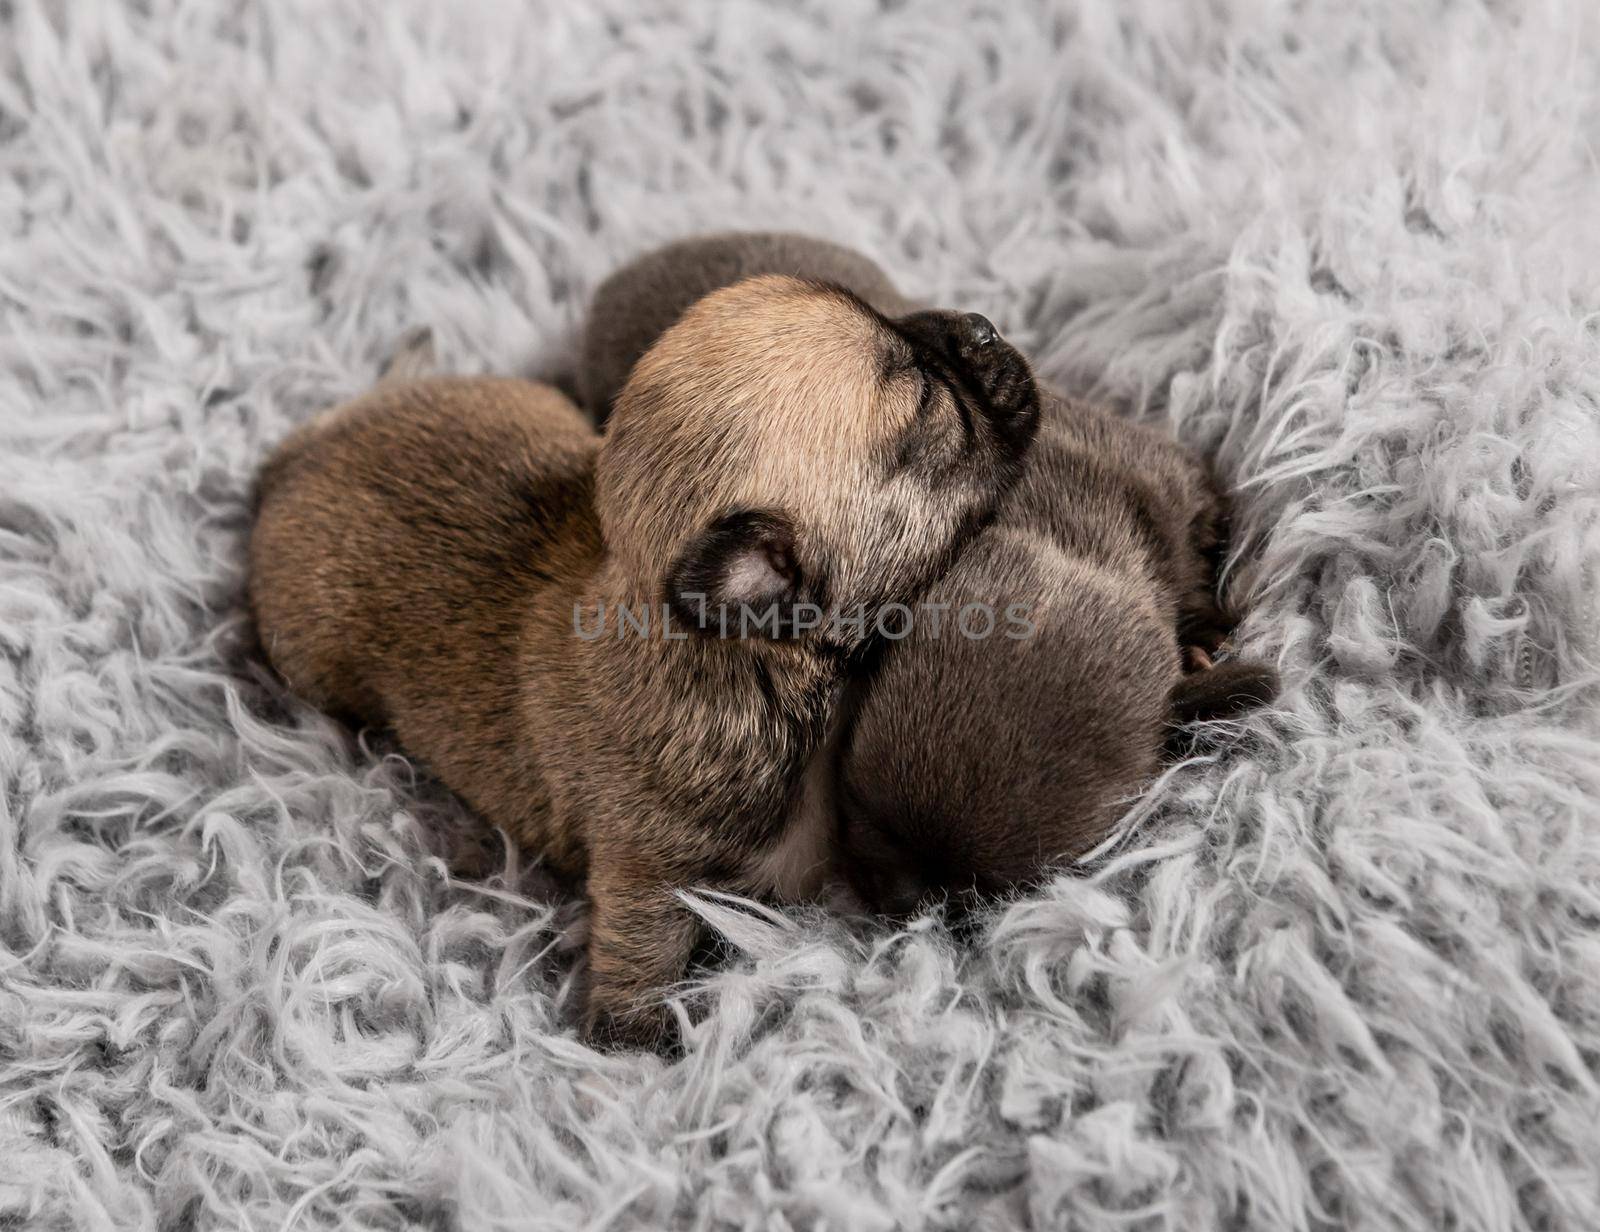 Little cute chihuahua breed puppies together on gray coverlet